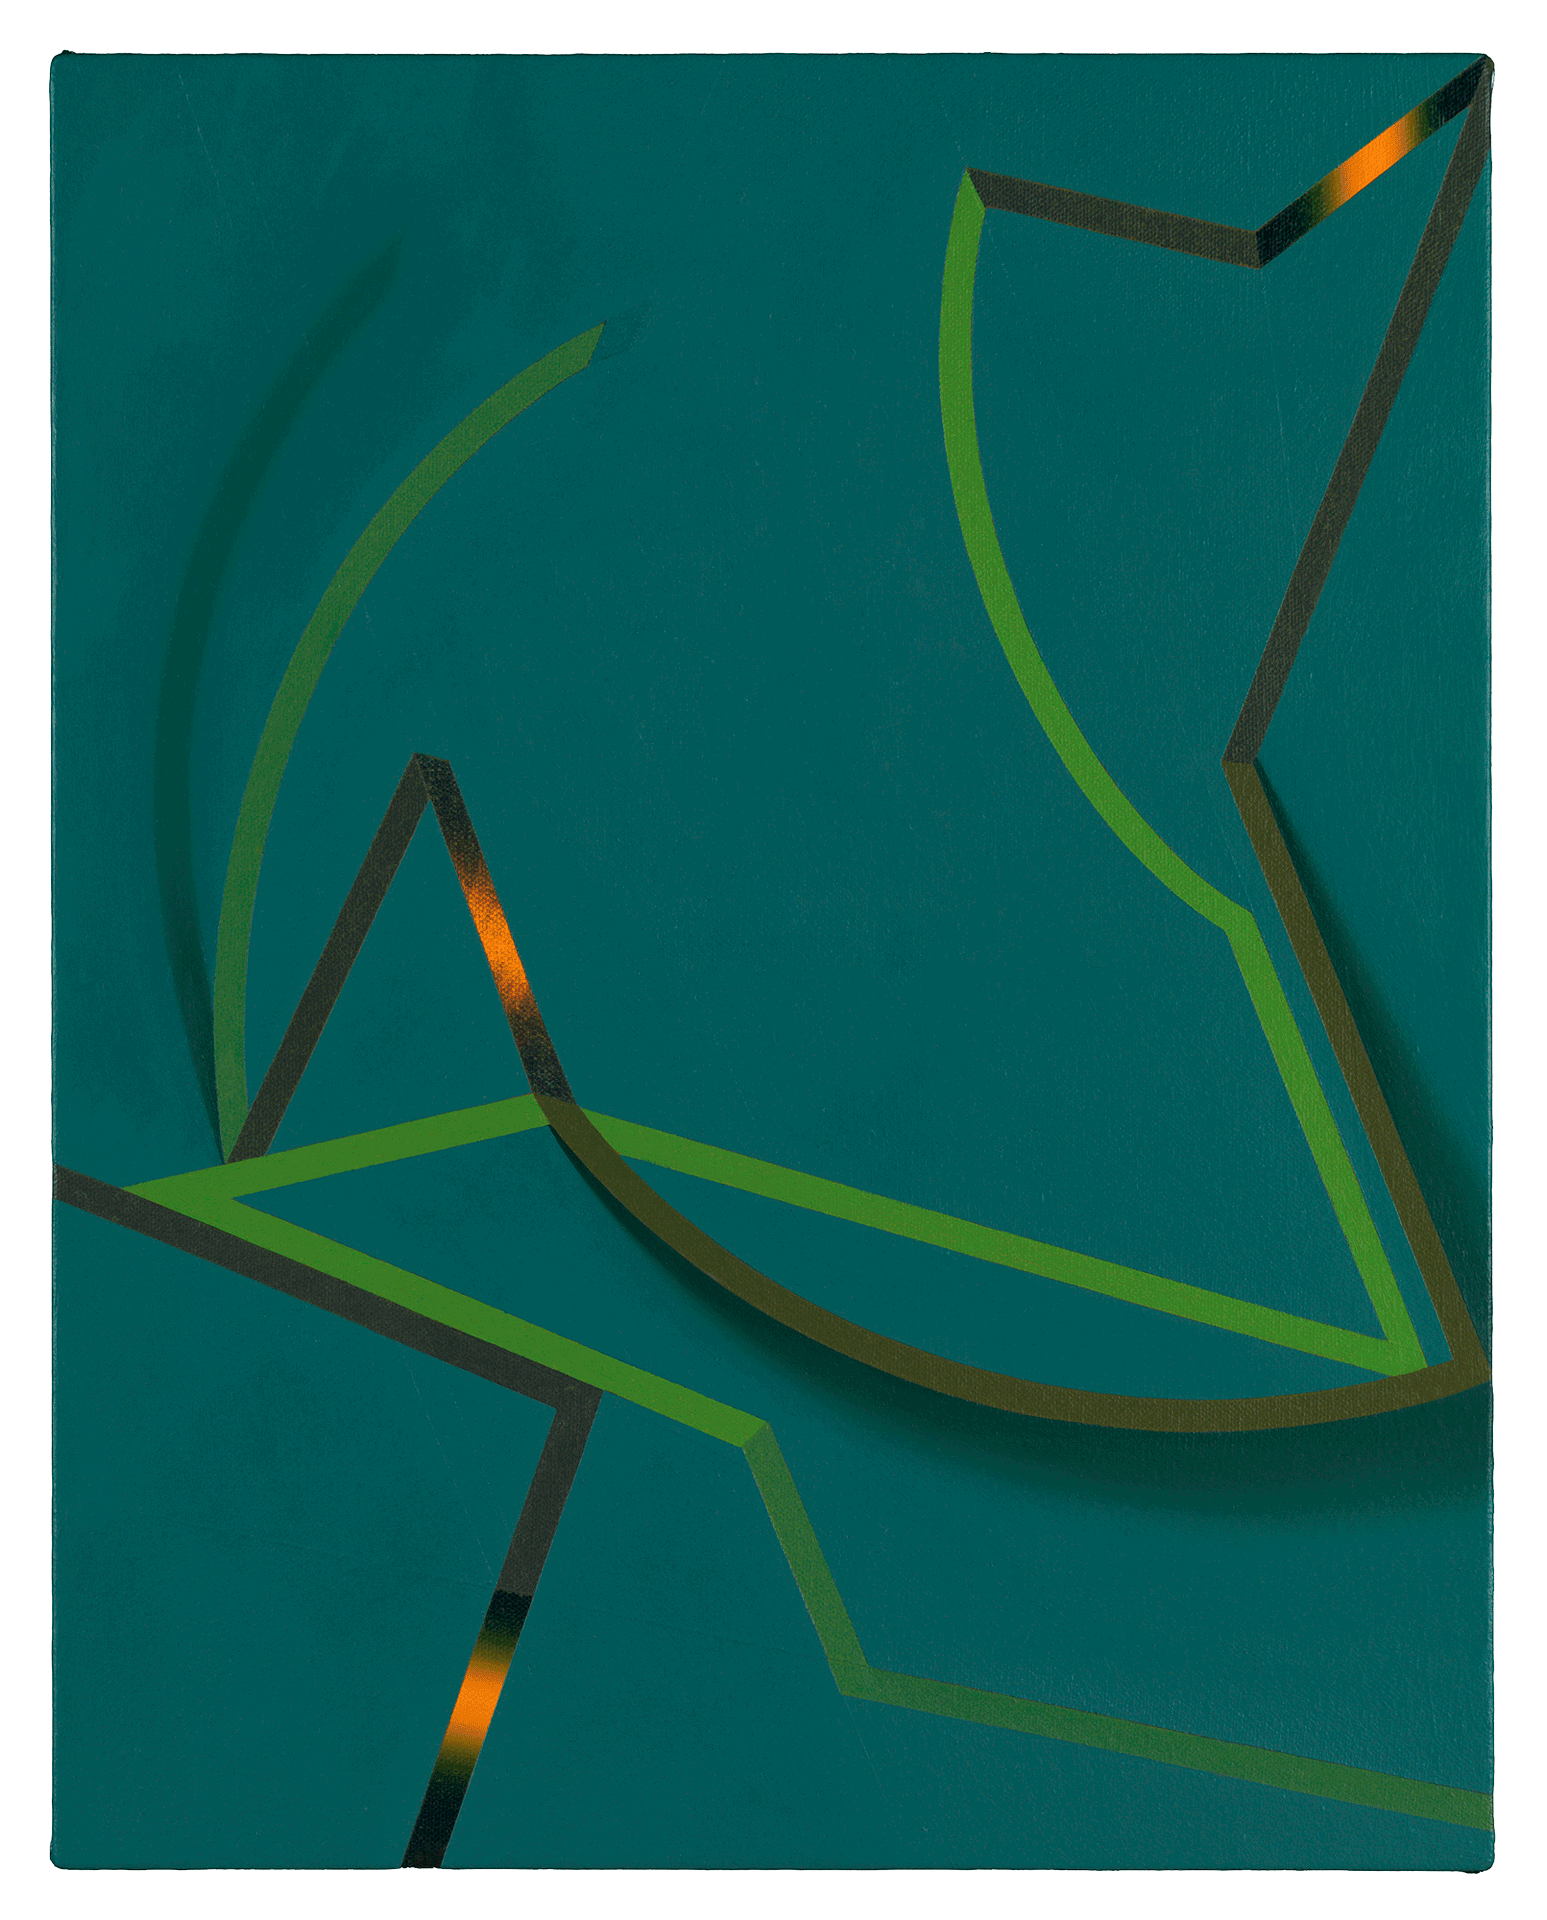 A painting by Tomma Abts, titled Bilte, dated 2008.